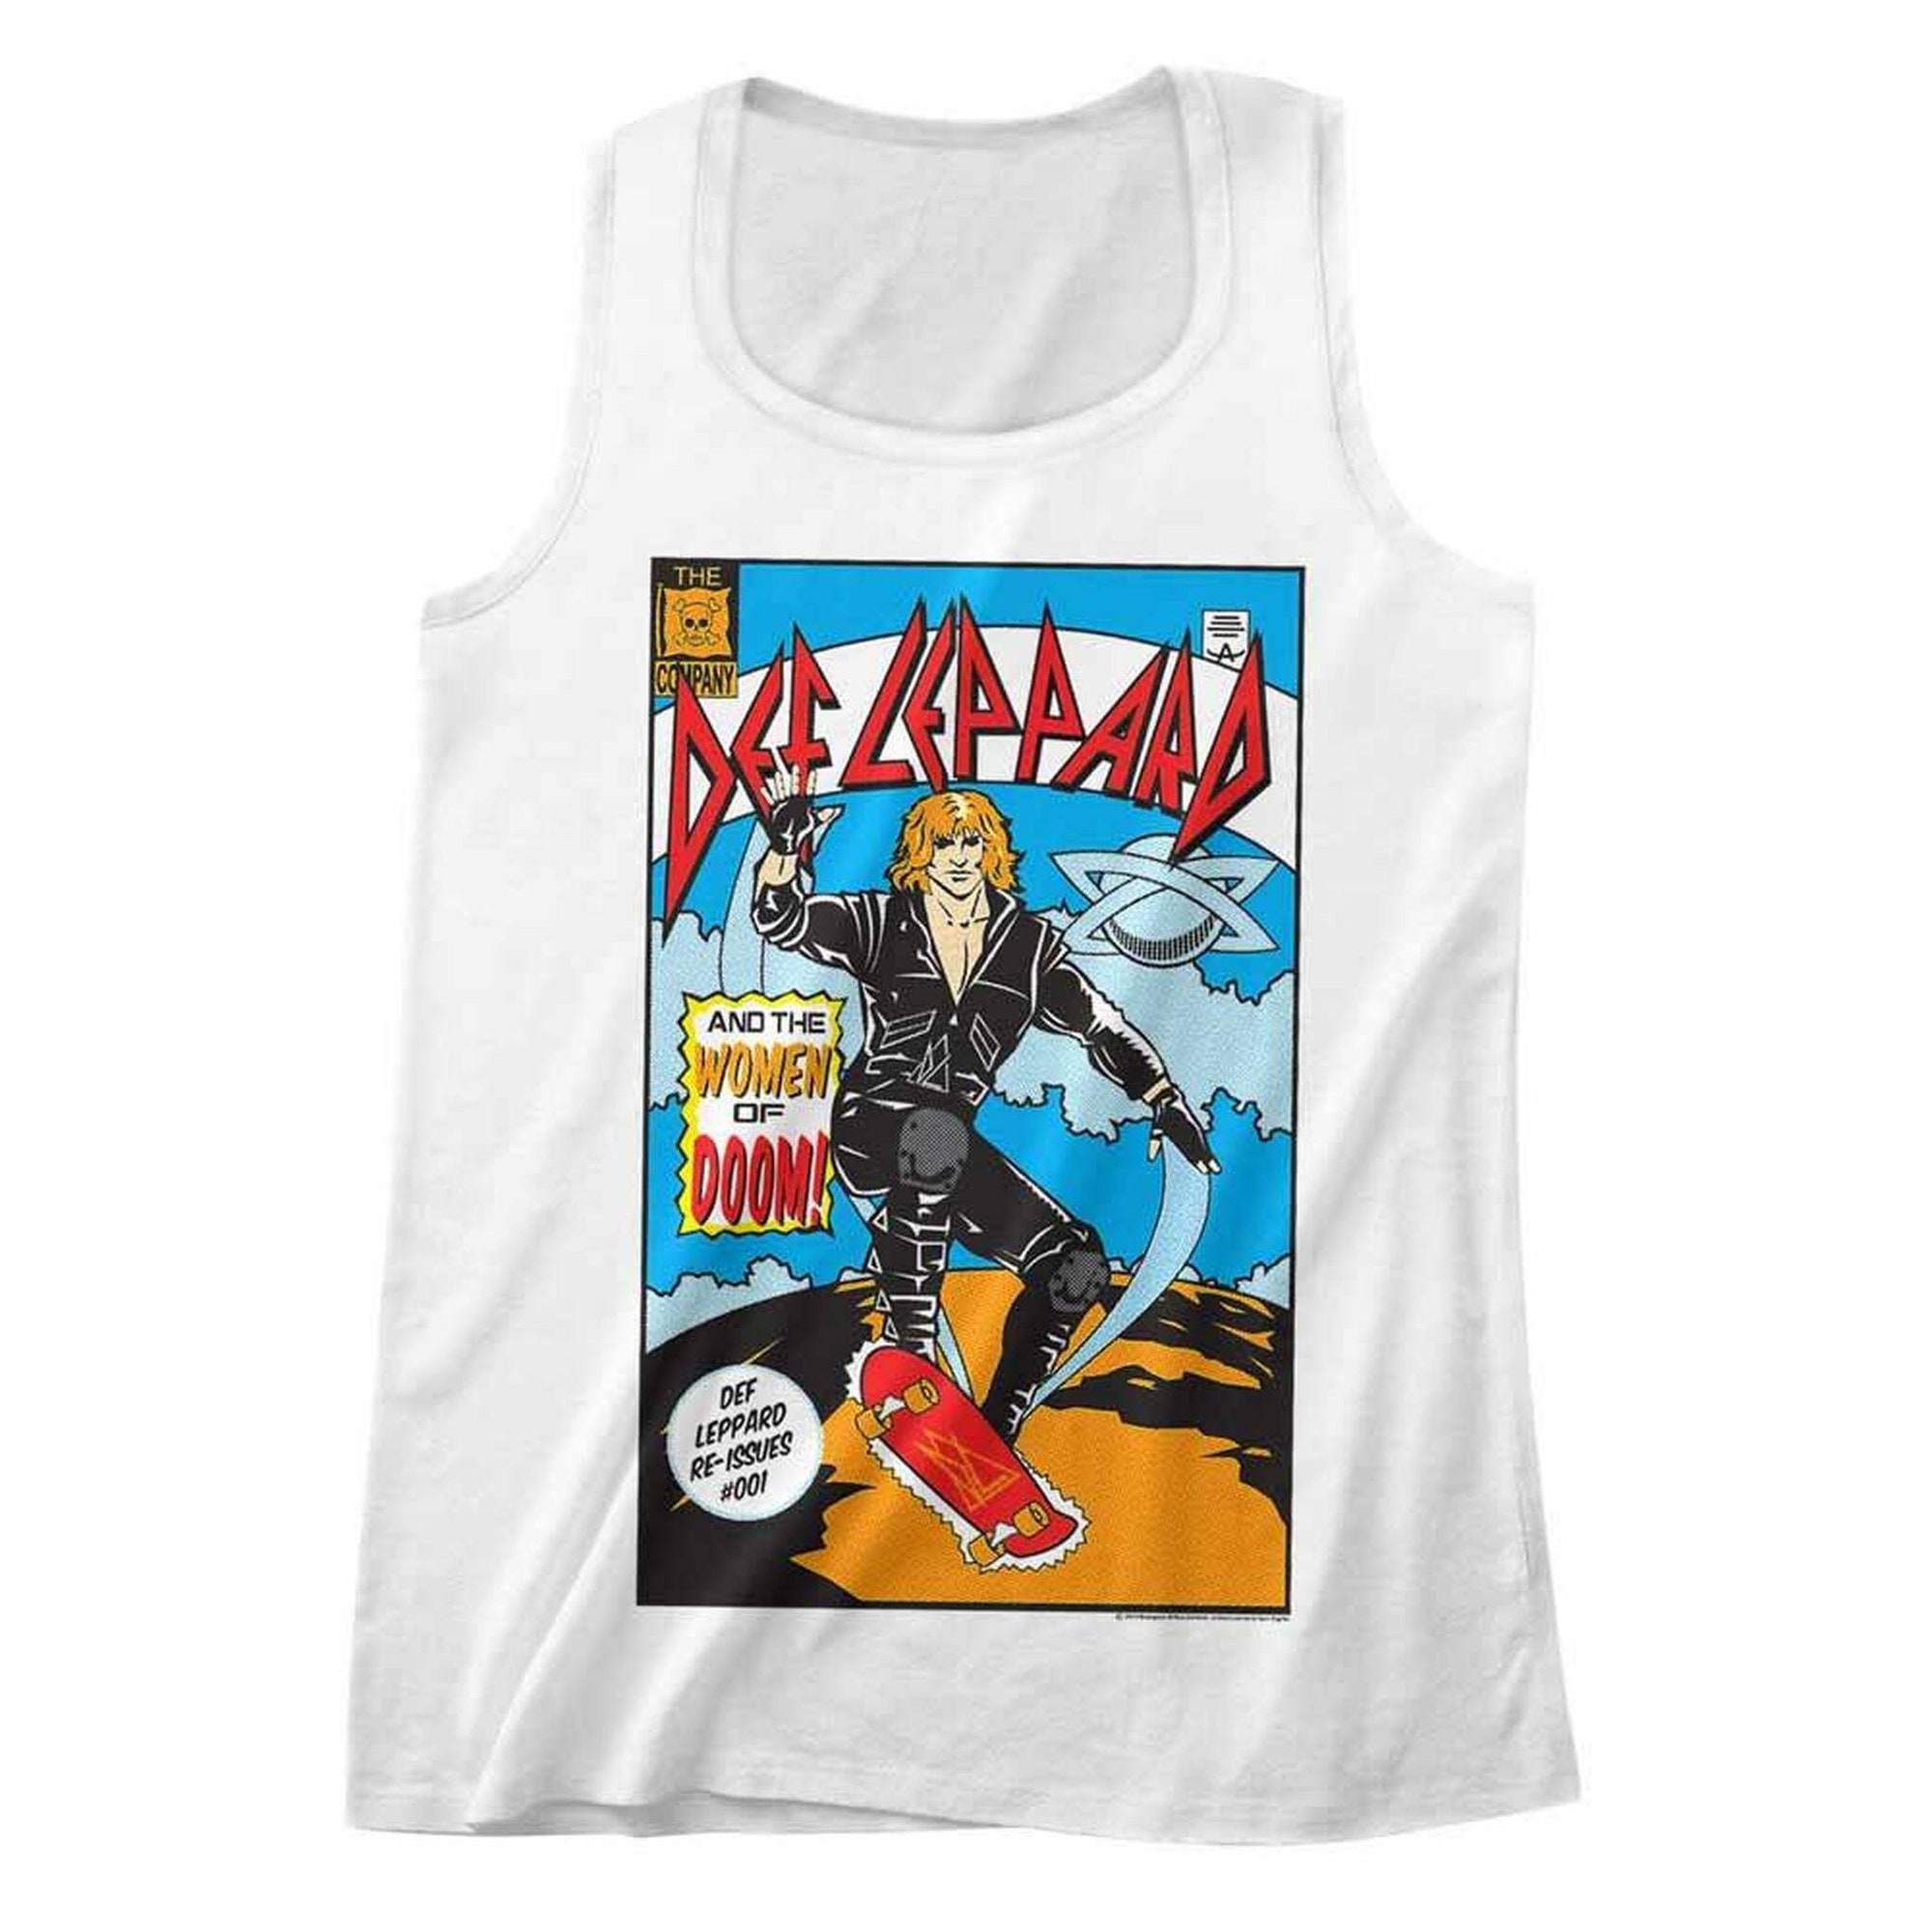 Discover Def Leppard Comic White Adult Tank Top T-Shirt